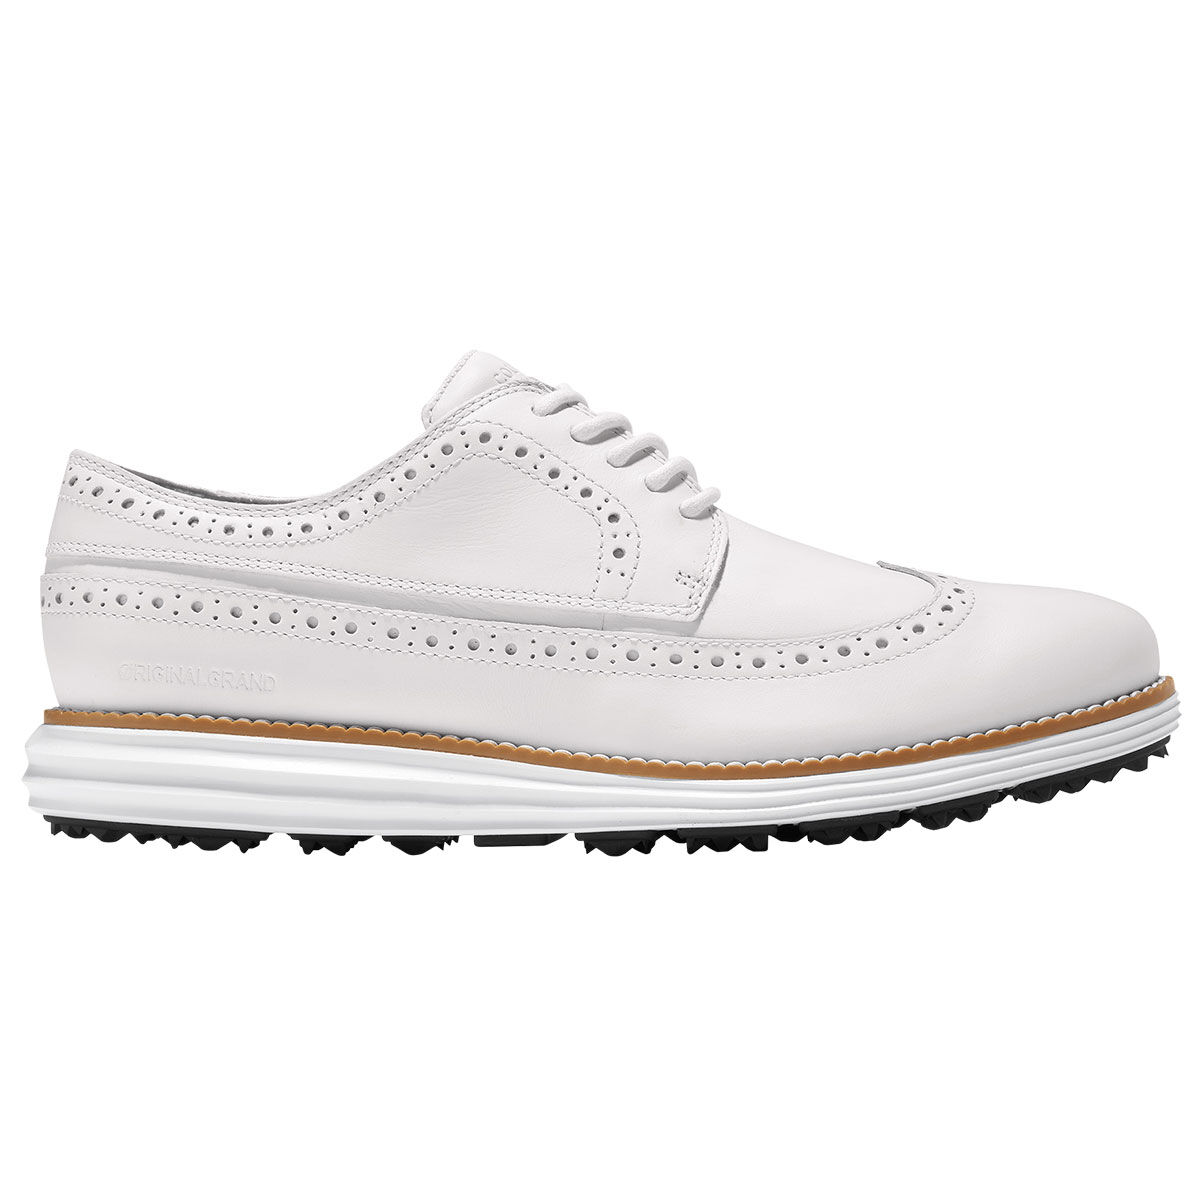 Cole Haan Men’s White and Brown OG Longwing Oxford Spikeless Golf Shoes, Size: 8 | American Golf